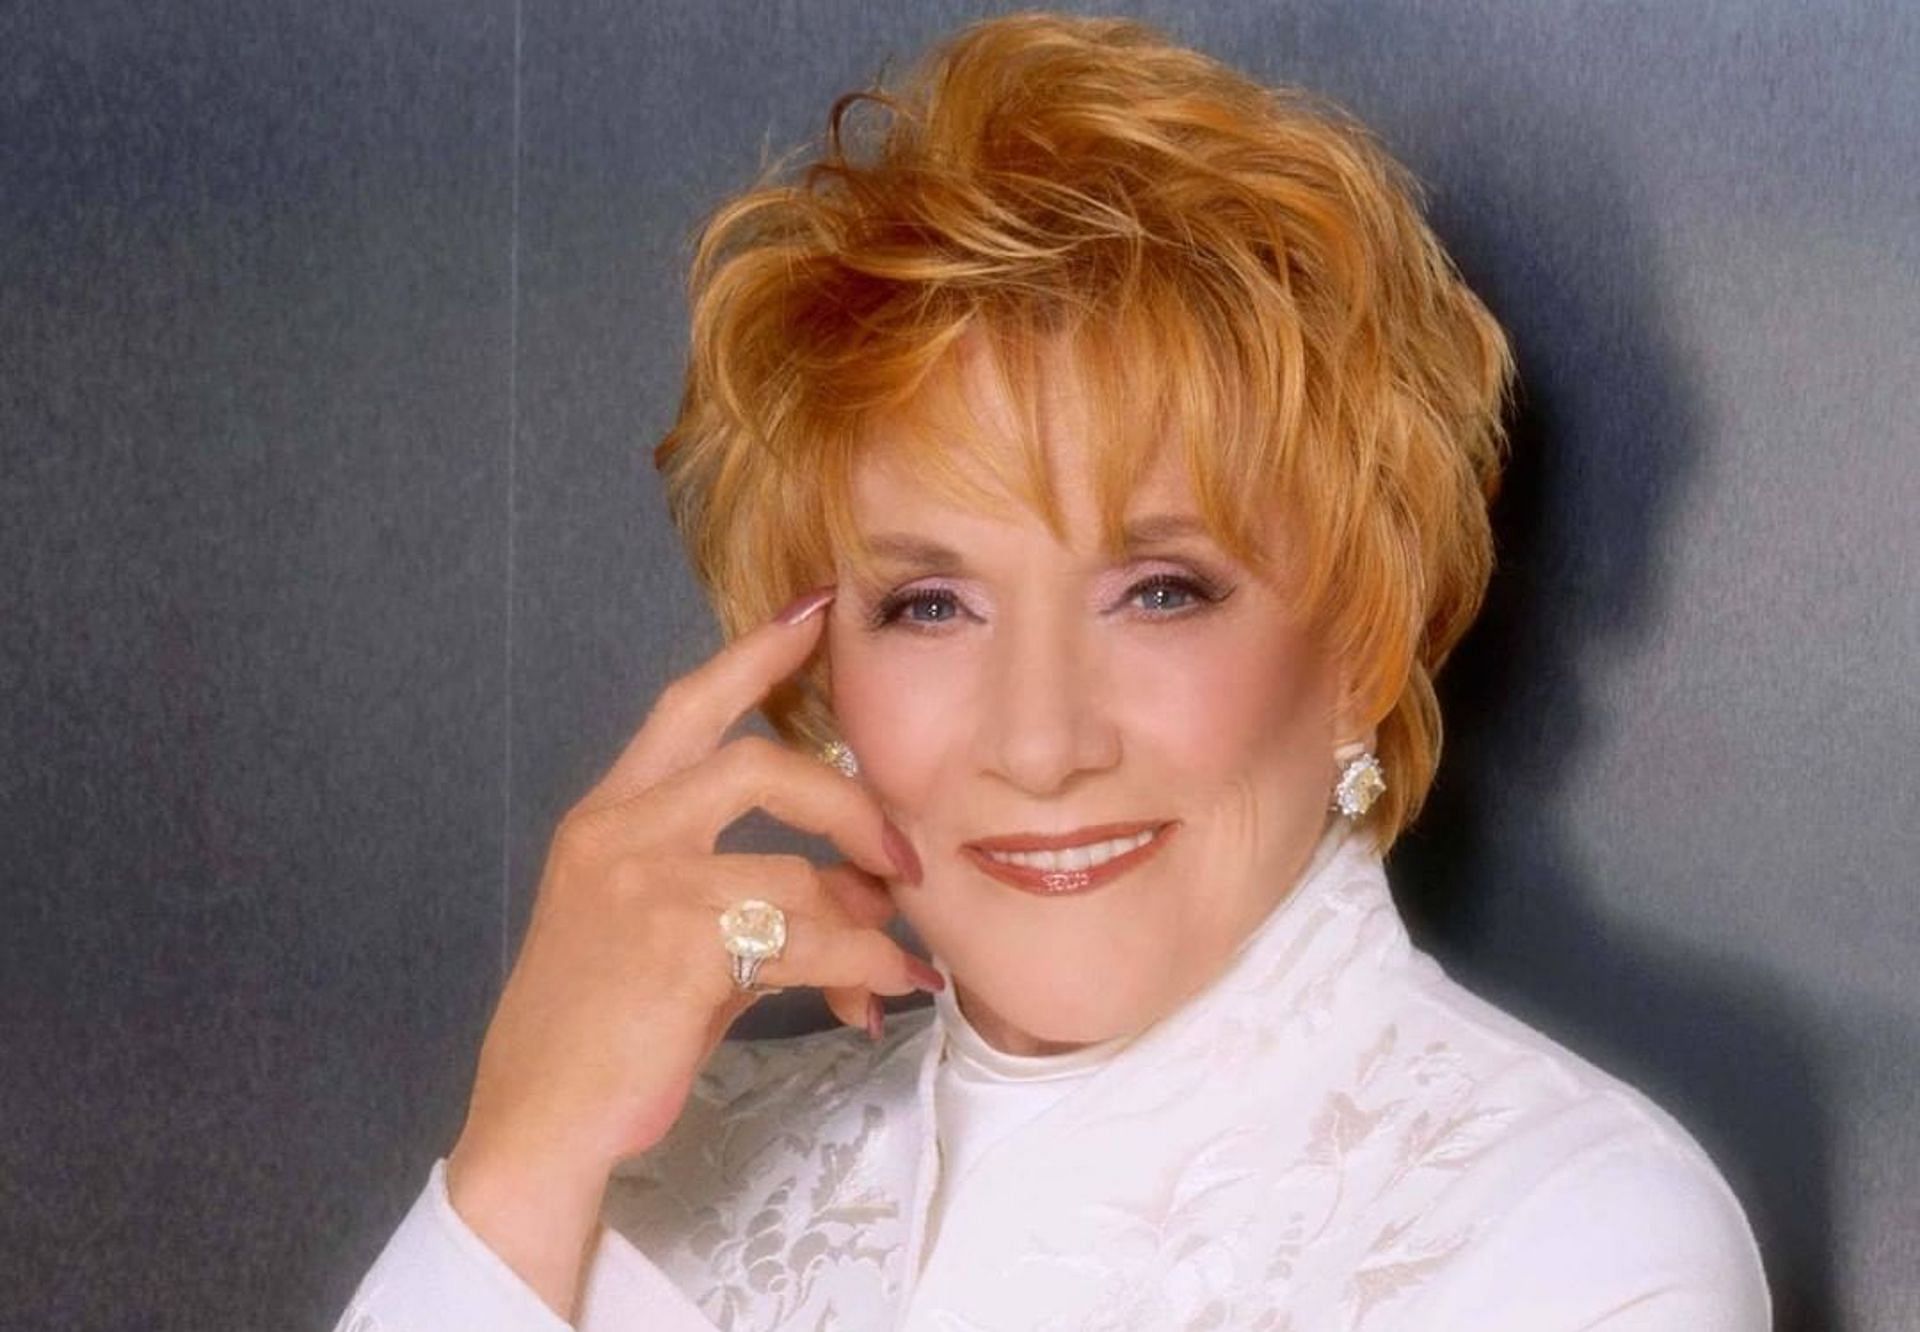 Wilma Jeanne Cooper as Katherine Chancellor (Image via Instagram/@youngandrestlesscbs)